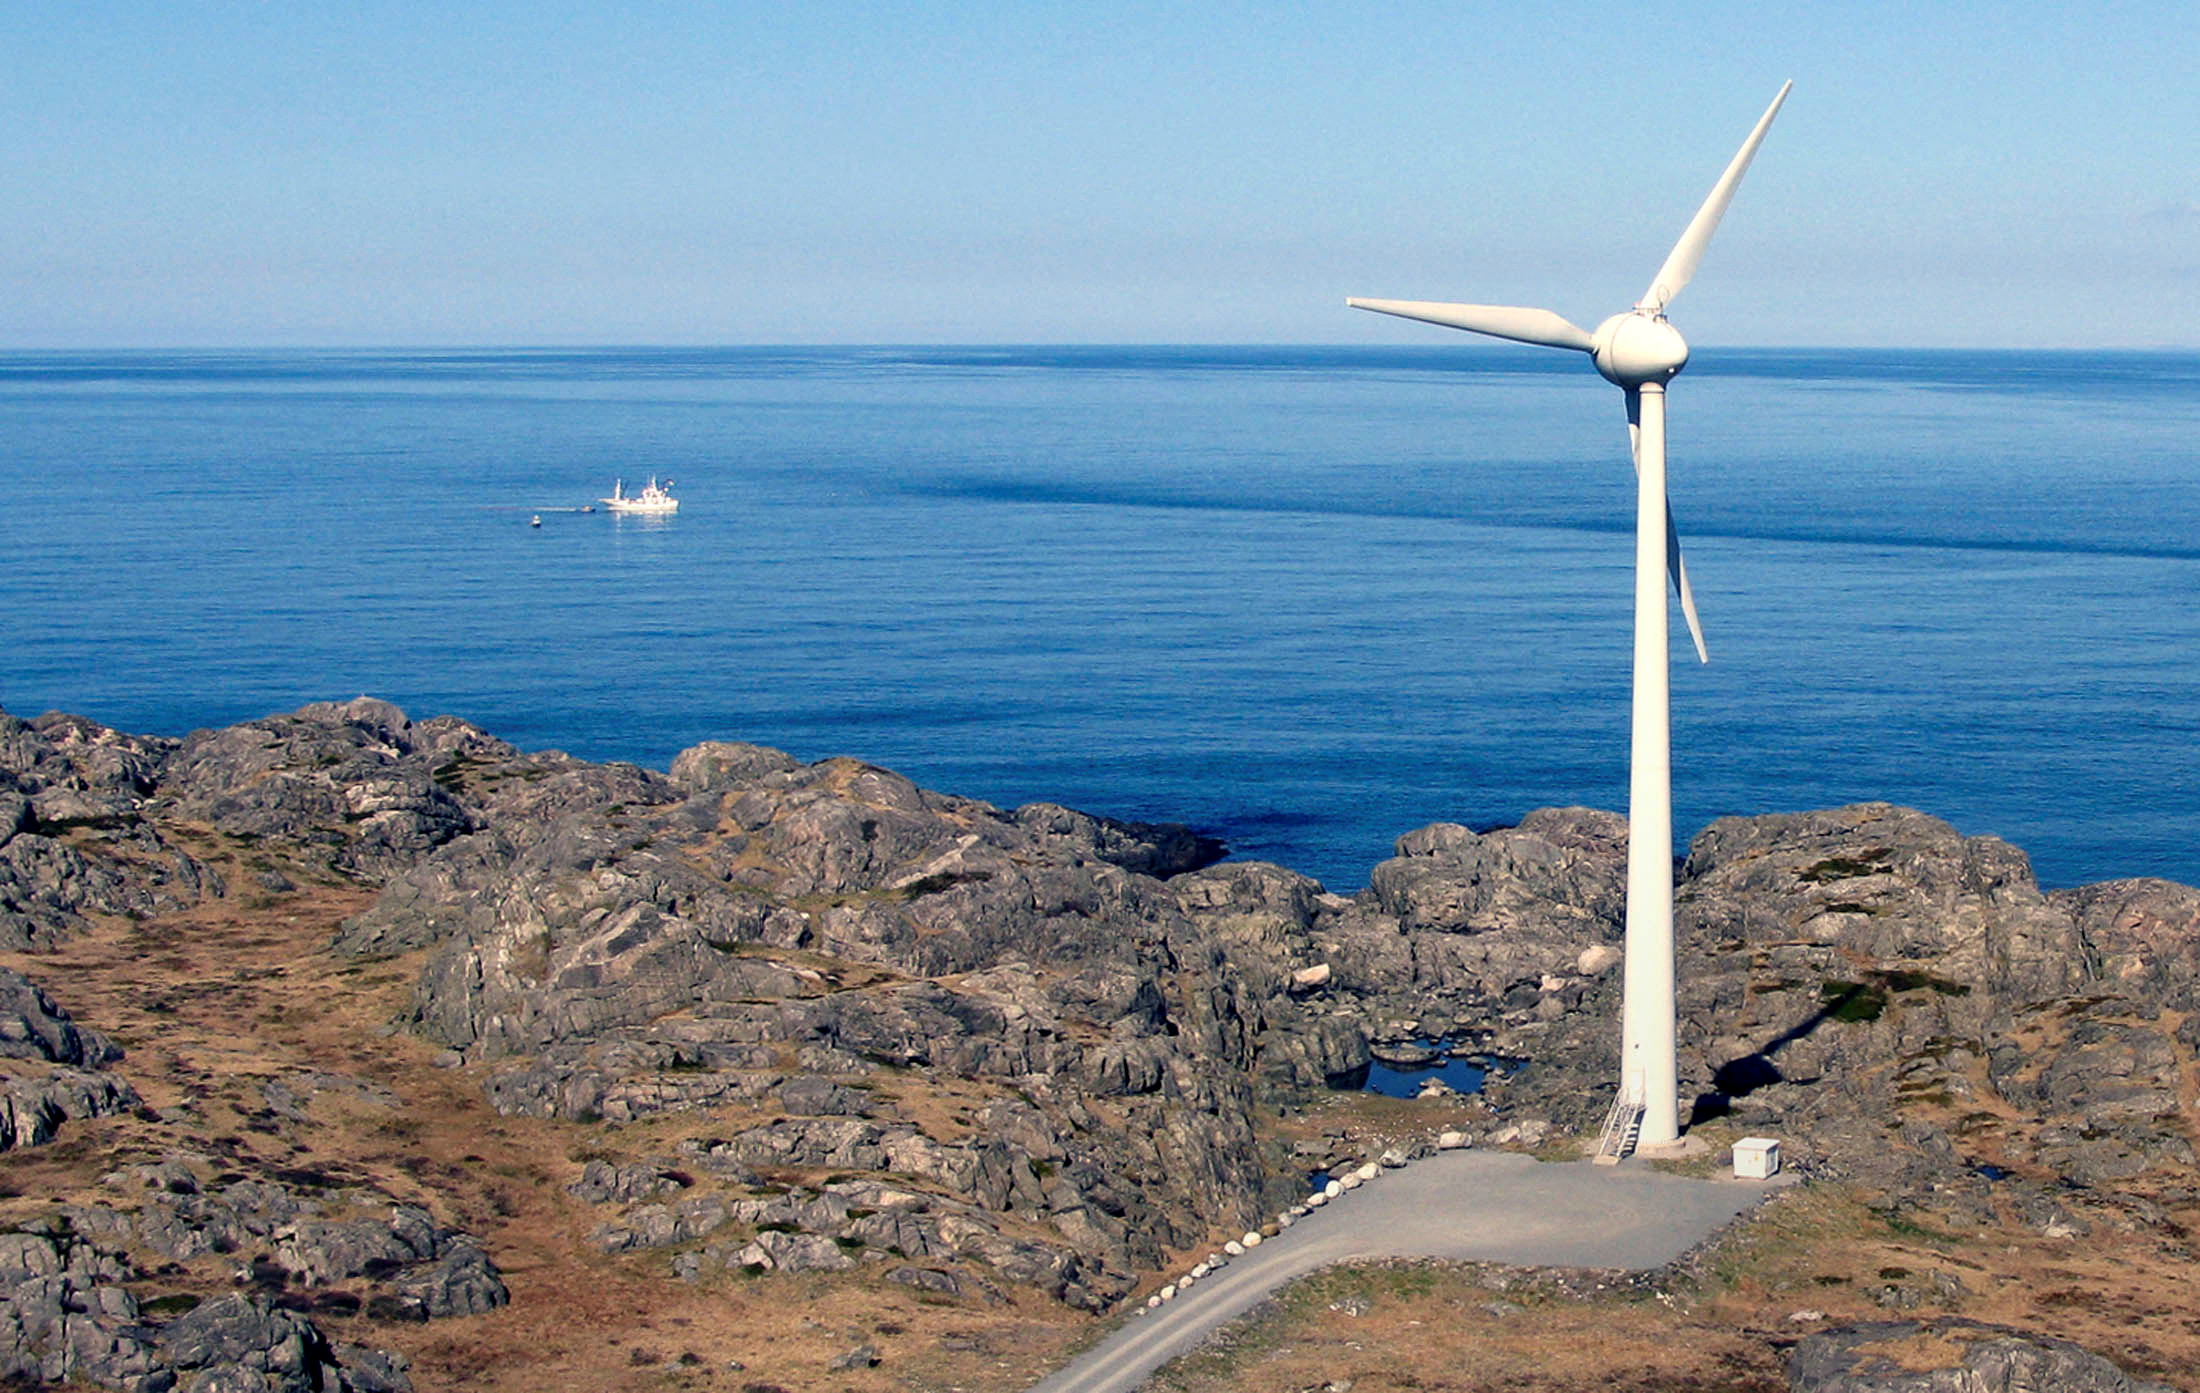 A windmill stands next to the ocean in Utsira, a North Sea island